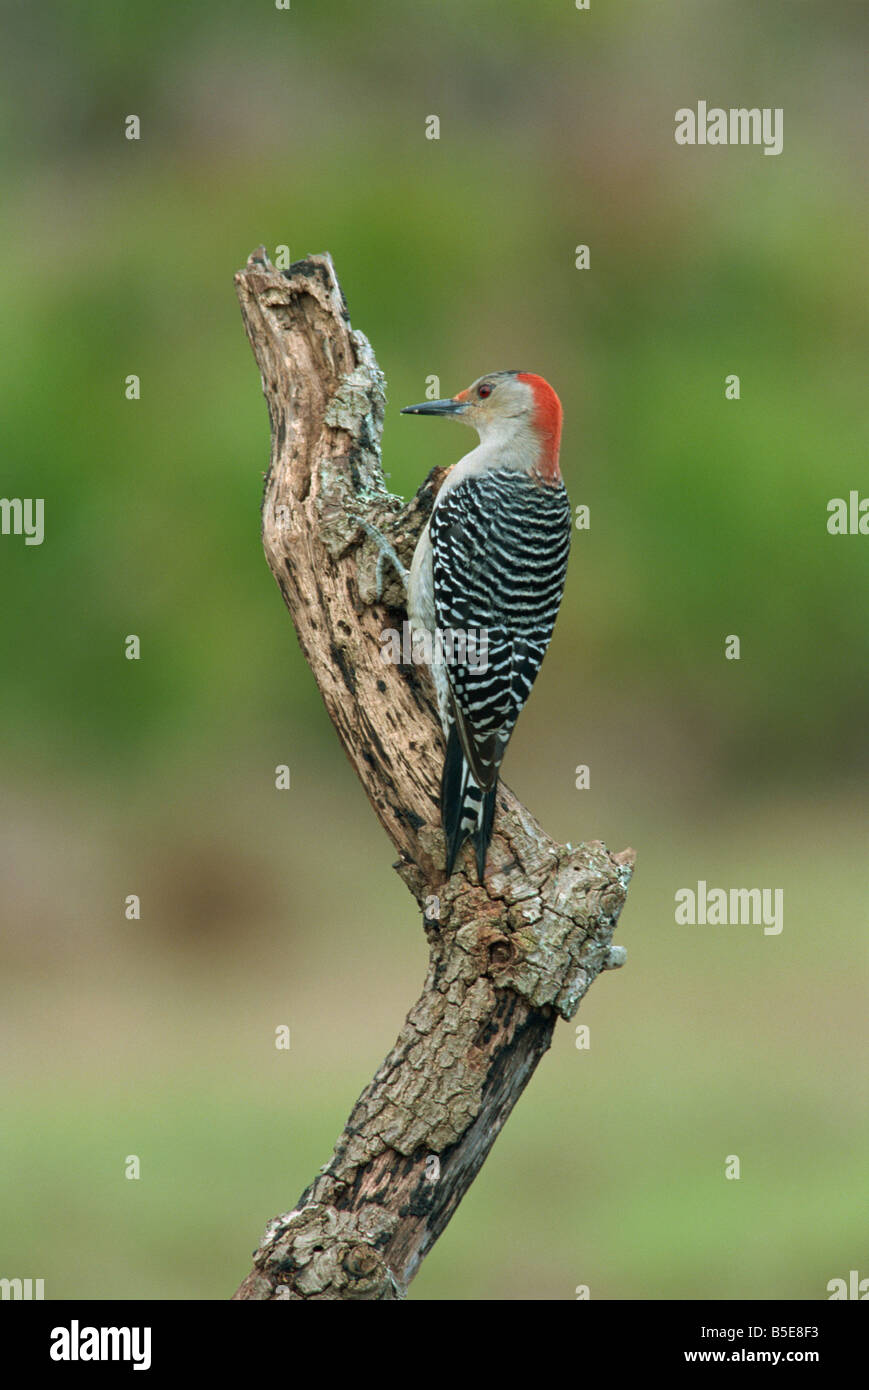 Red bellied Woodpecker South Florida USA R Rainford Stock Photo